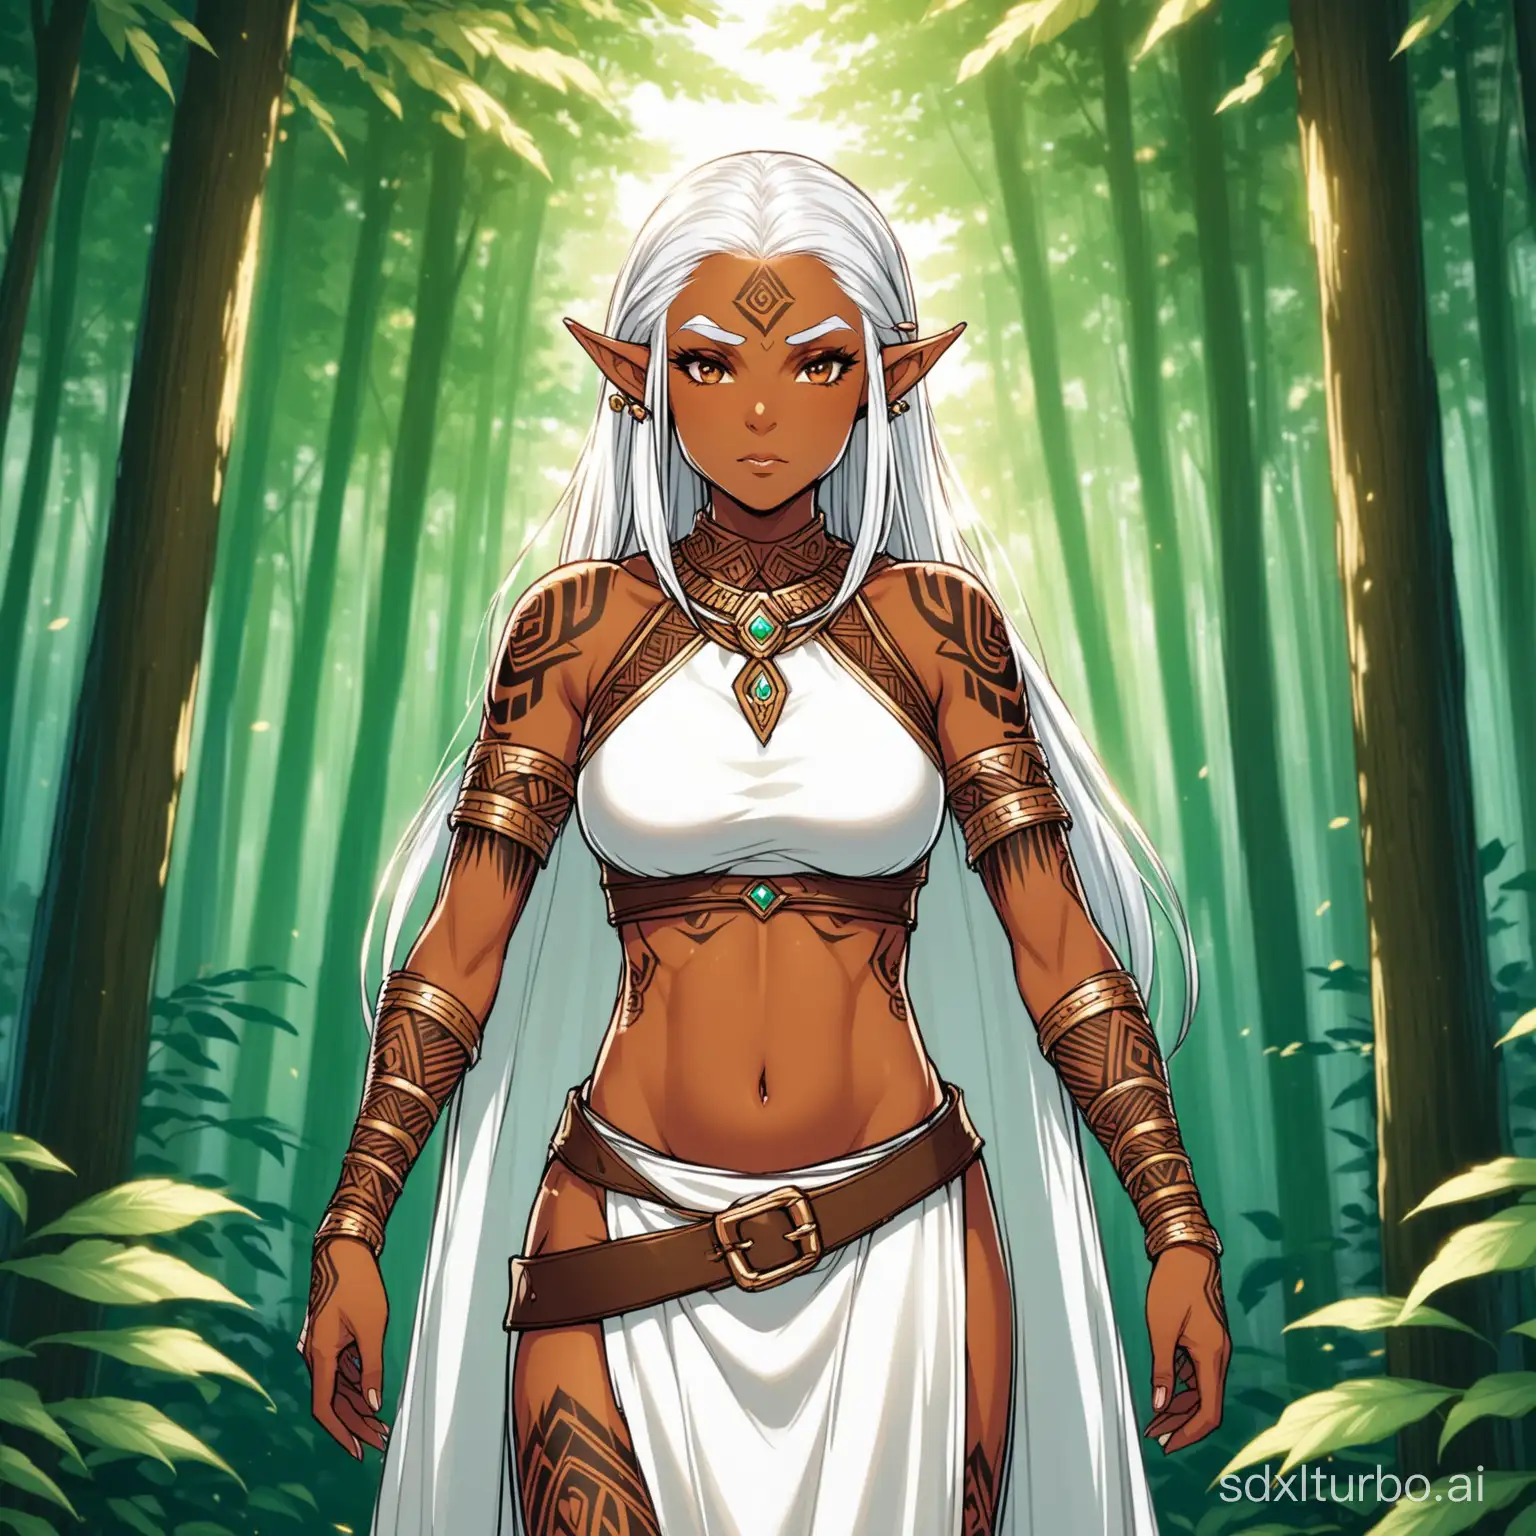 A mature (((tall elf woman))) with dark brown skin and long, flowing white hair framing a striking bang style, dressed in small light armor and accessorized with tribal tattoos on her arms and midriff, standing confidently in a (forest setting) oozing an air of seriousness.